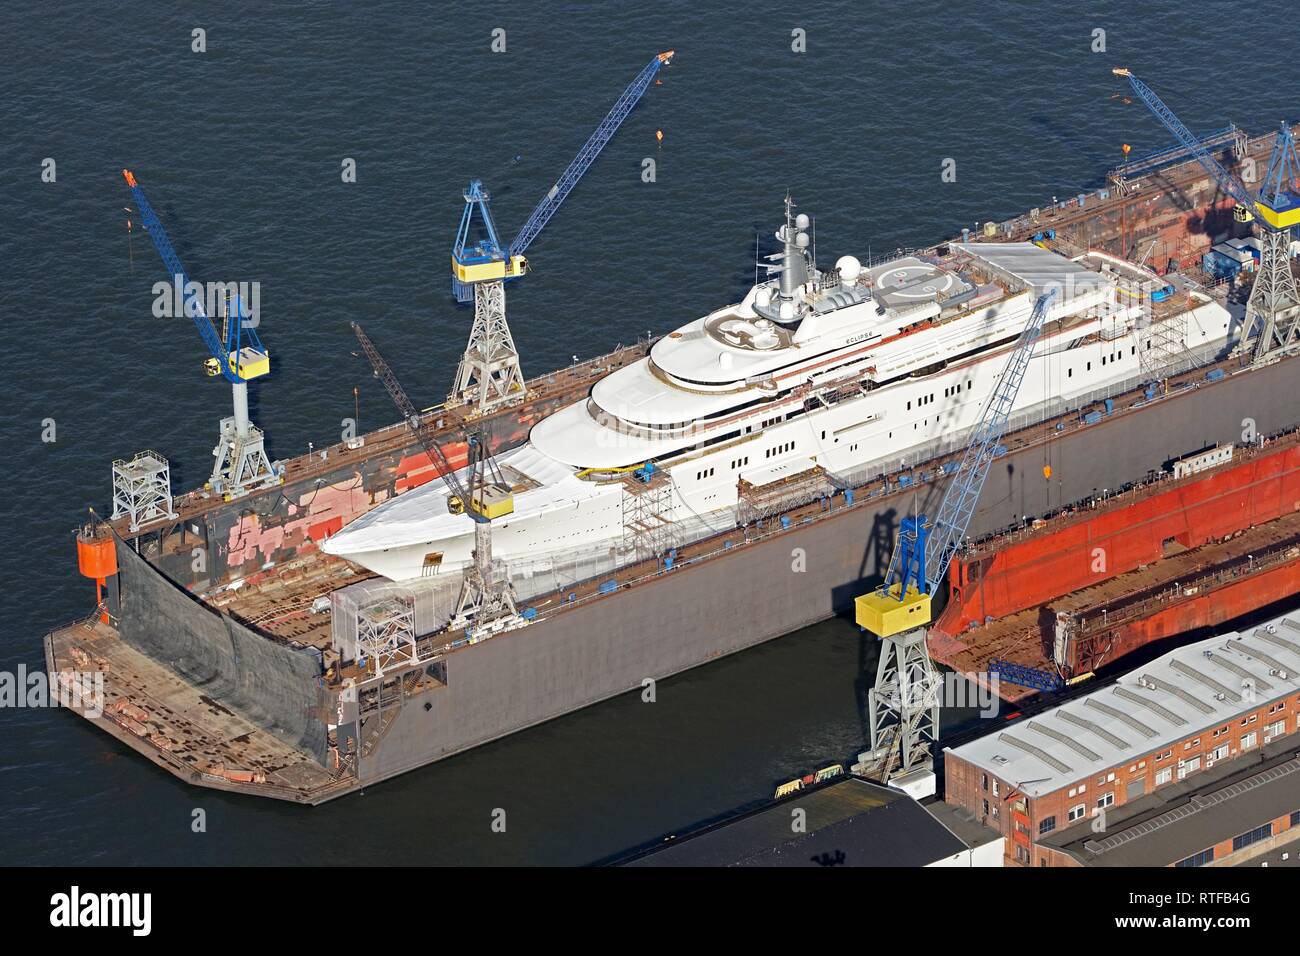 Aerial view, Mega-Yacht Eclipse by Roman Abramowitsch on the dry dock, Hamburg, Germany Stock Photo